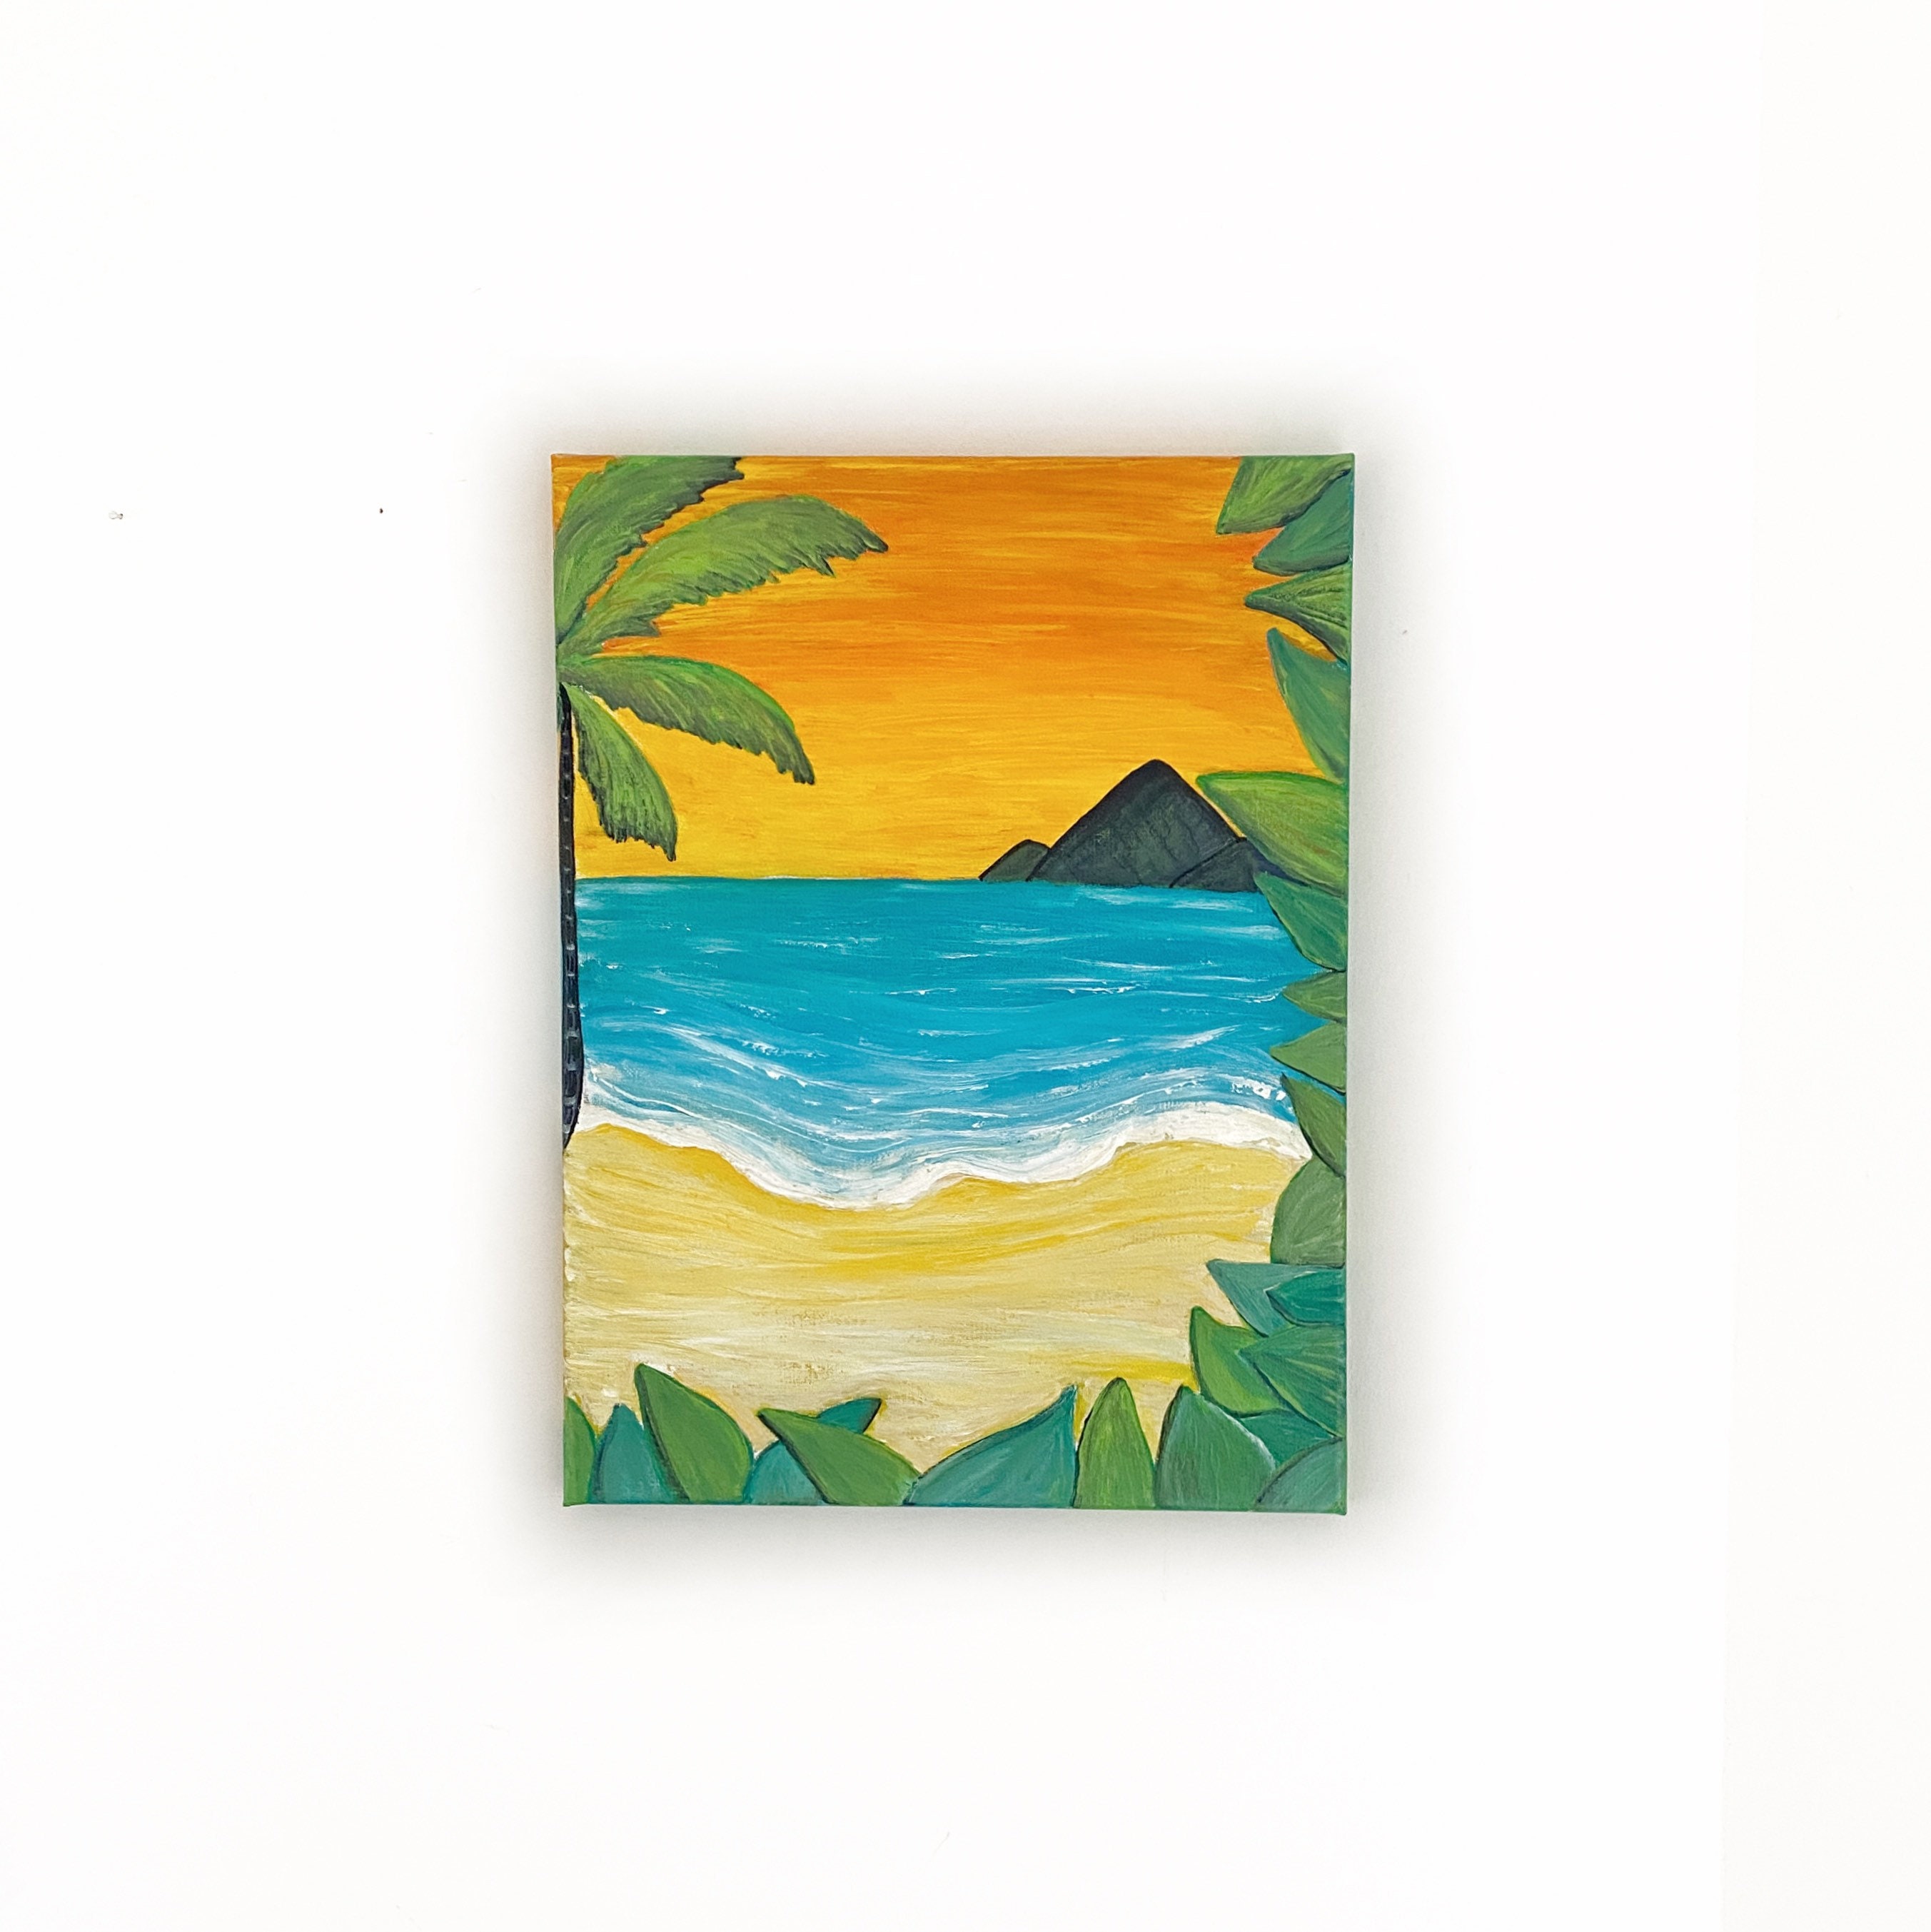 DIY Canvas Art Kit for Adults Beginner 11x14 inch-Colorful, Acrylic Paint,  Margarita On The Beach